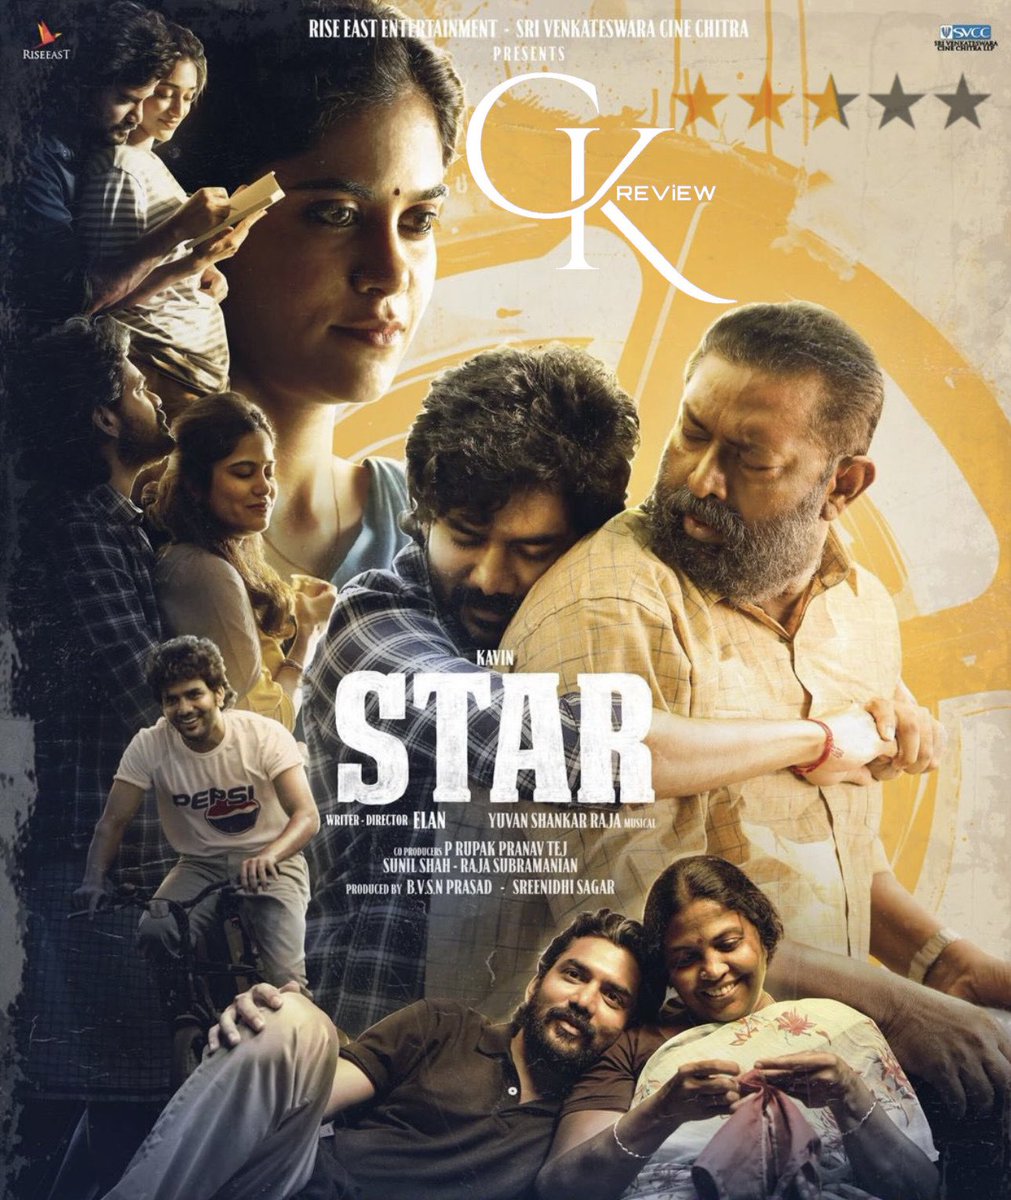 #Star (Tamil|2024) - THEATRE. Kavin is Fantastic, Lal Awesome, Yuvan’s BGM Rocks. Tat 1 Surprise is Solid. Cinematic & Fun 1st Hlf. Avg 2nd Hlf. Post Interval Romance, Forced Scenes & Emotions, along with d length didnt work. Climax 10+Mins Single Shot Seq Idea Super. WATCHABLE!